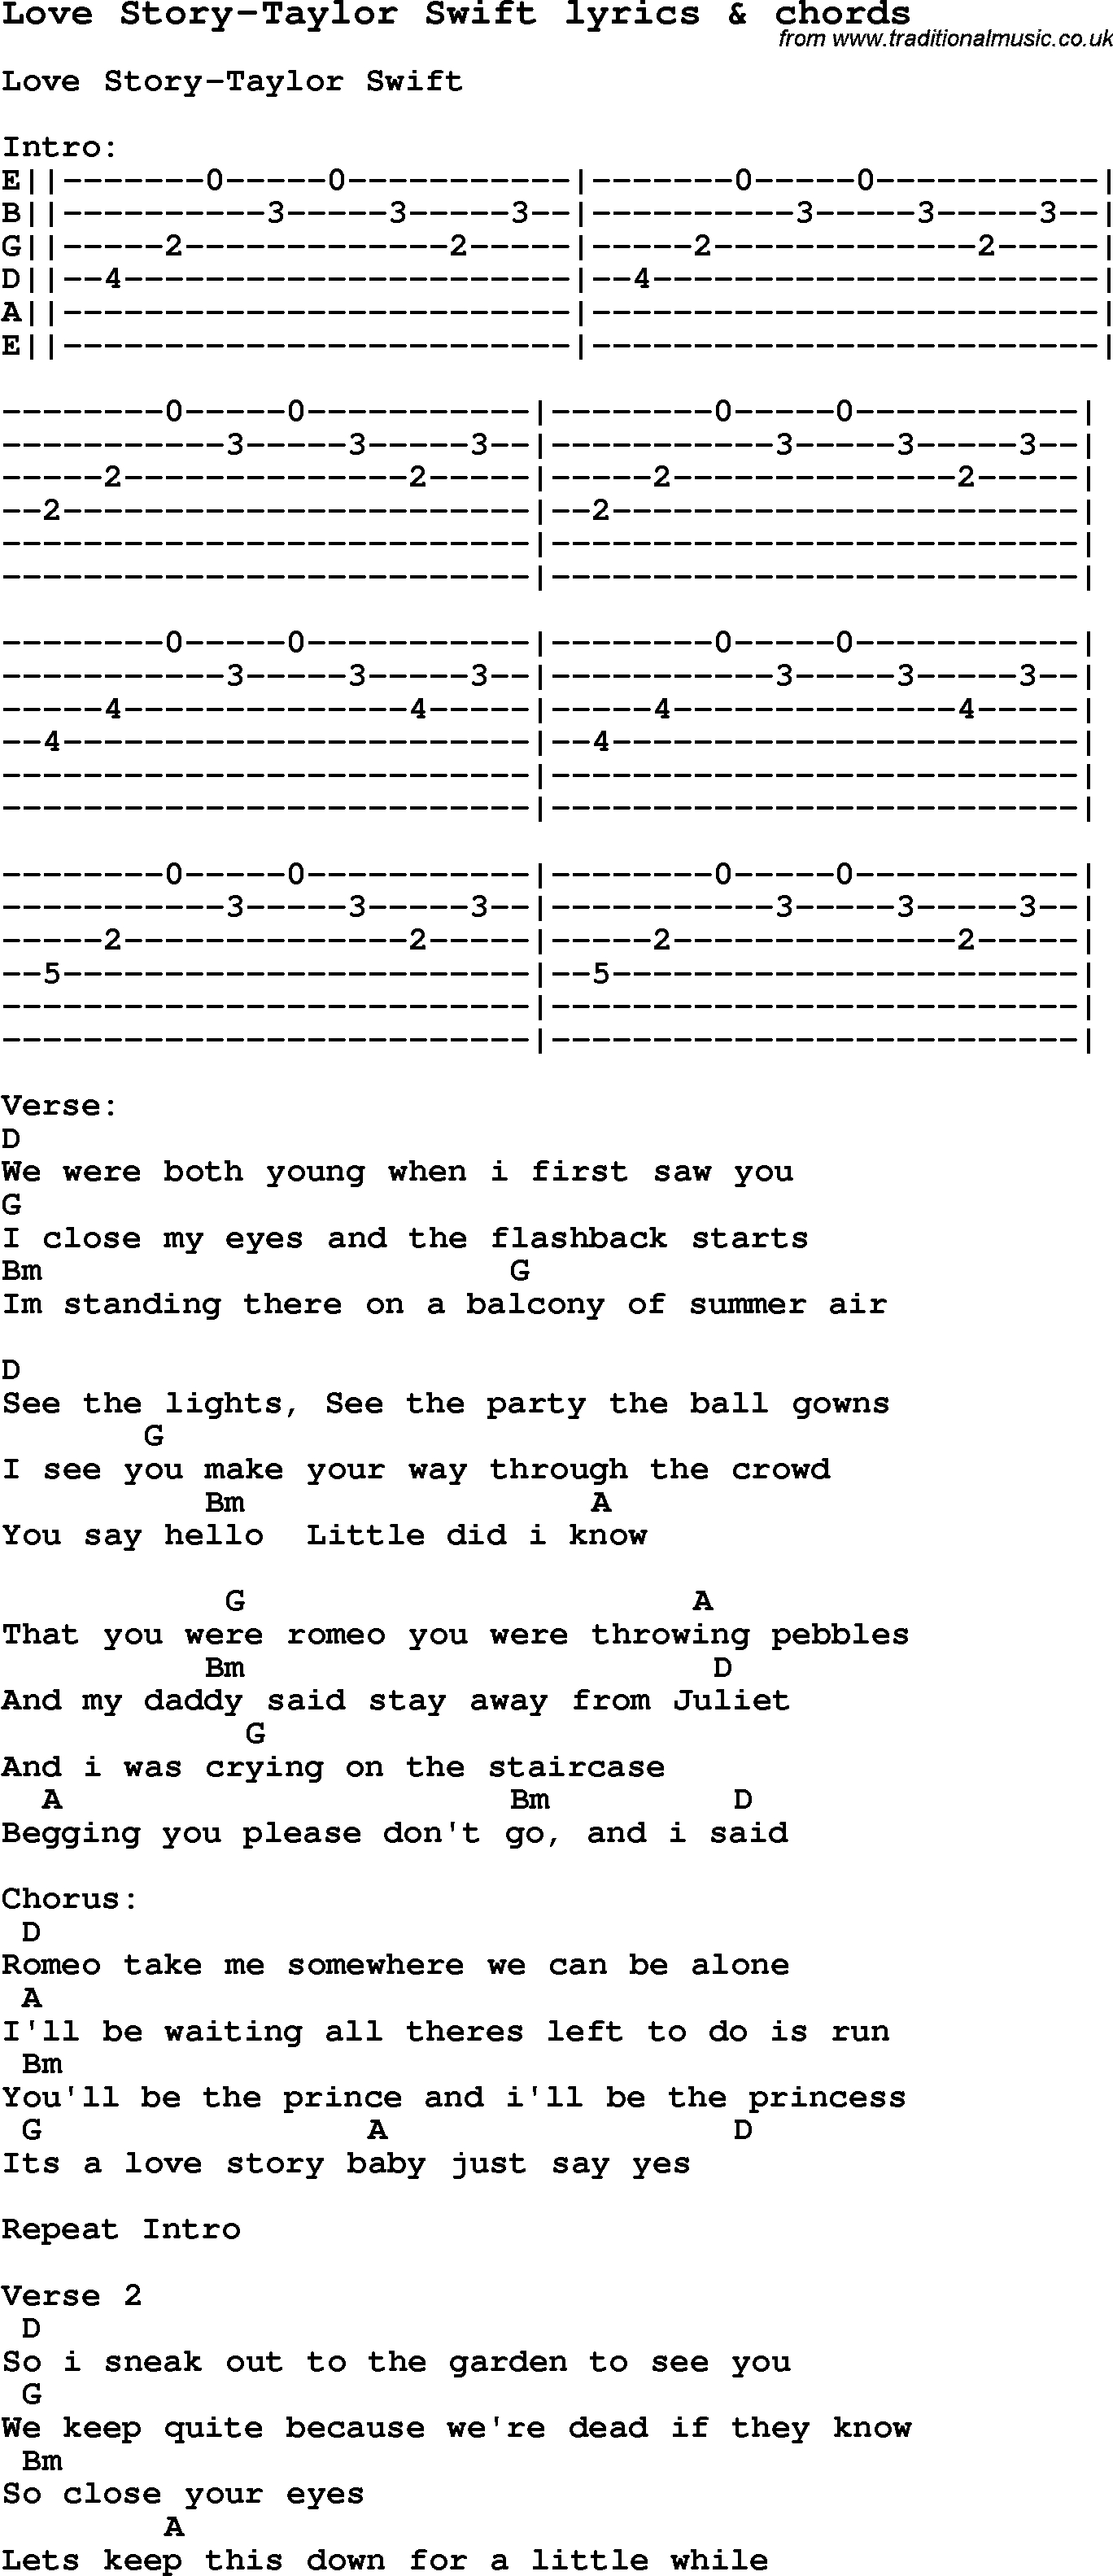 Taylor Swift Chords Love Song Lyrics Forlove Story Taylor Swift With Chords